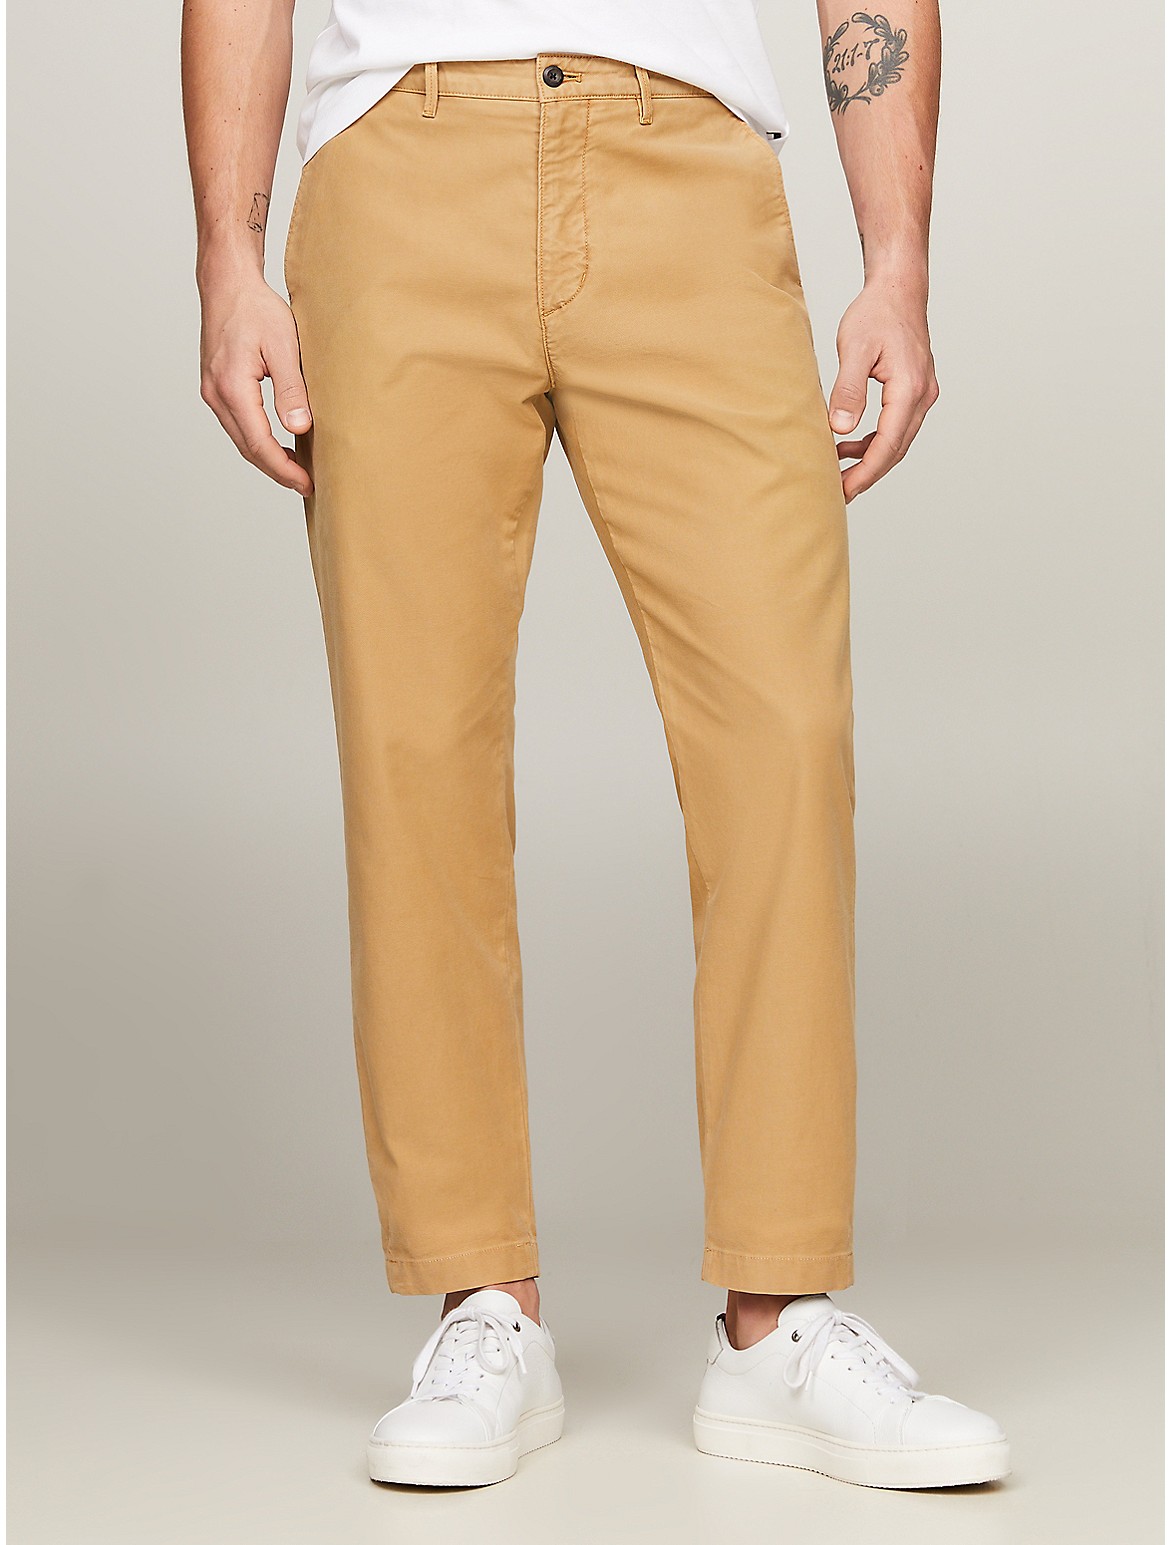 Tommy Hilfiger Men's Harlem Relaxed Tapered Fit Chino